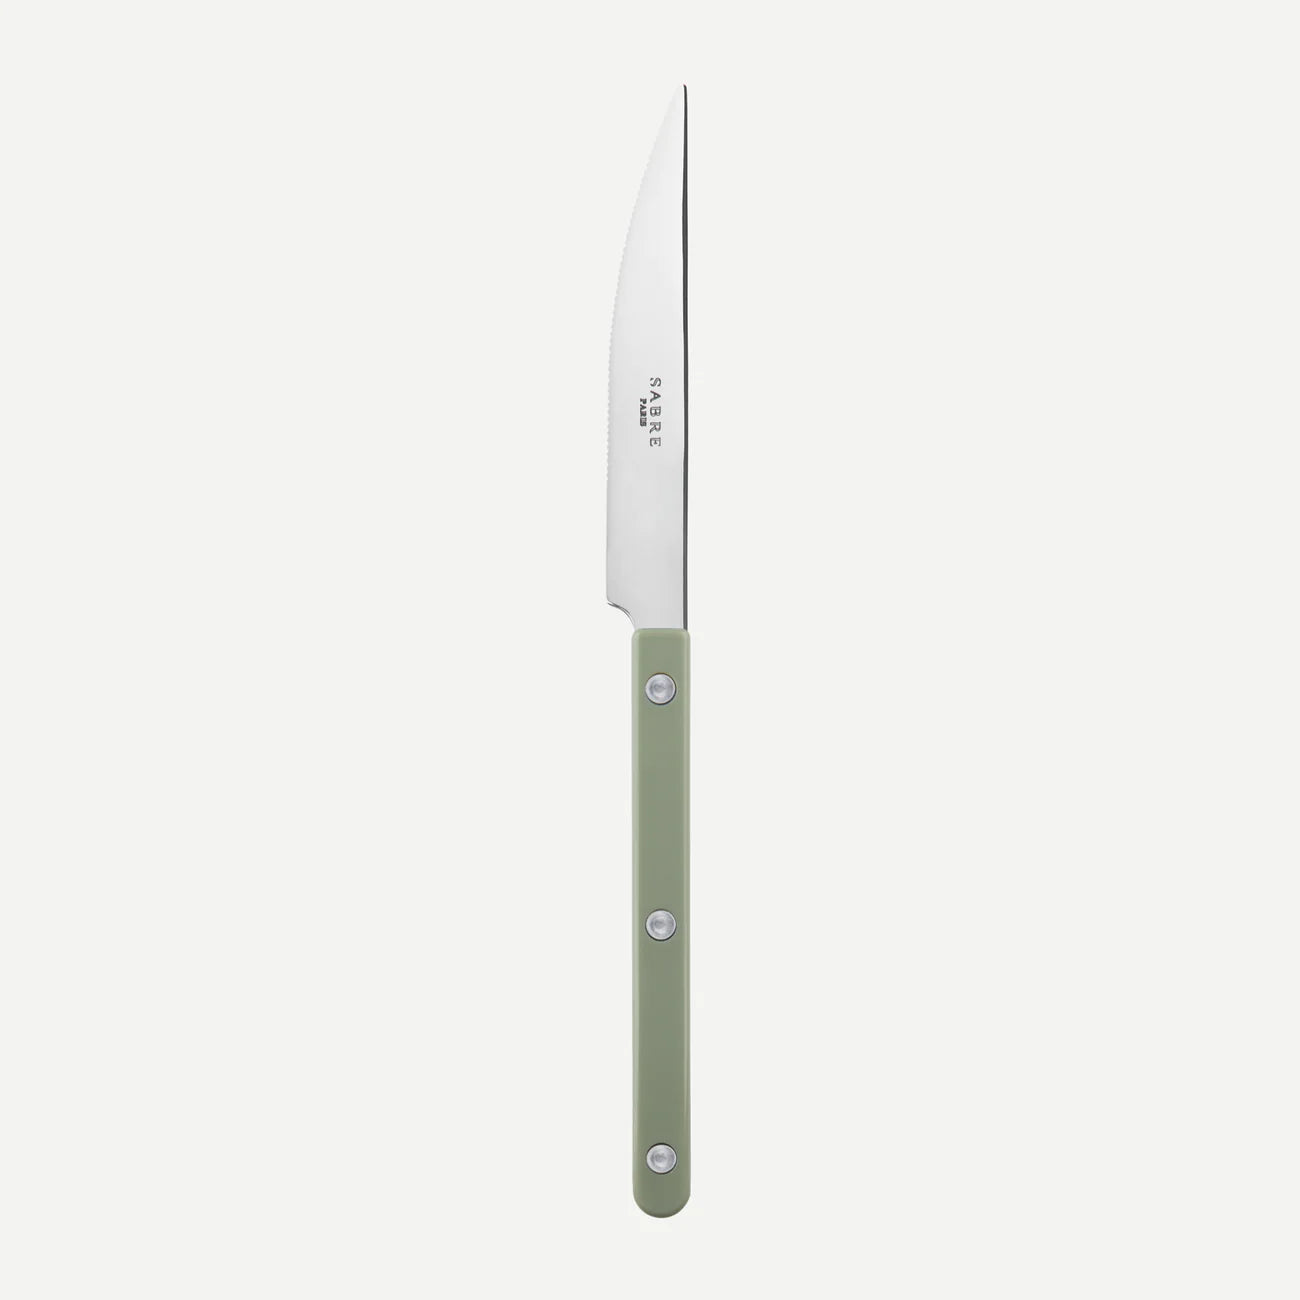 Sabre Bistrot Shiny Cutlery - Asparagus